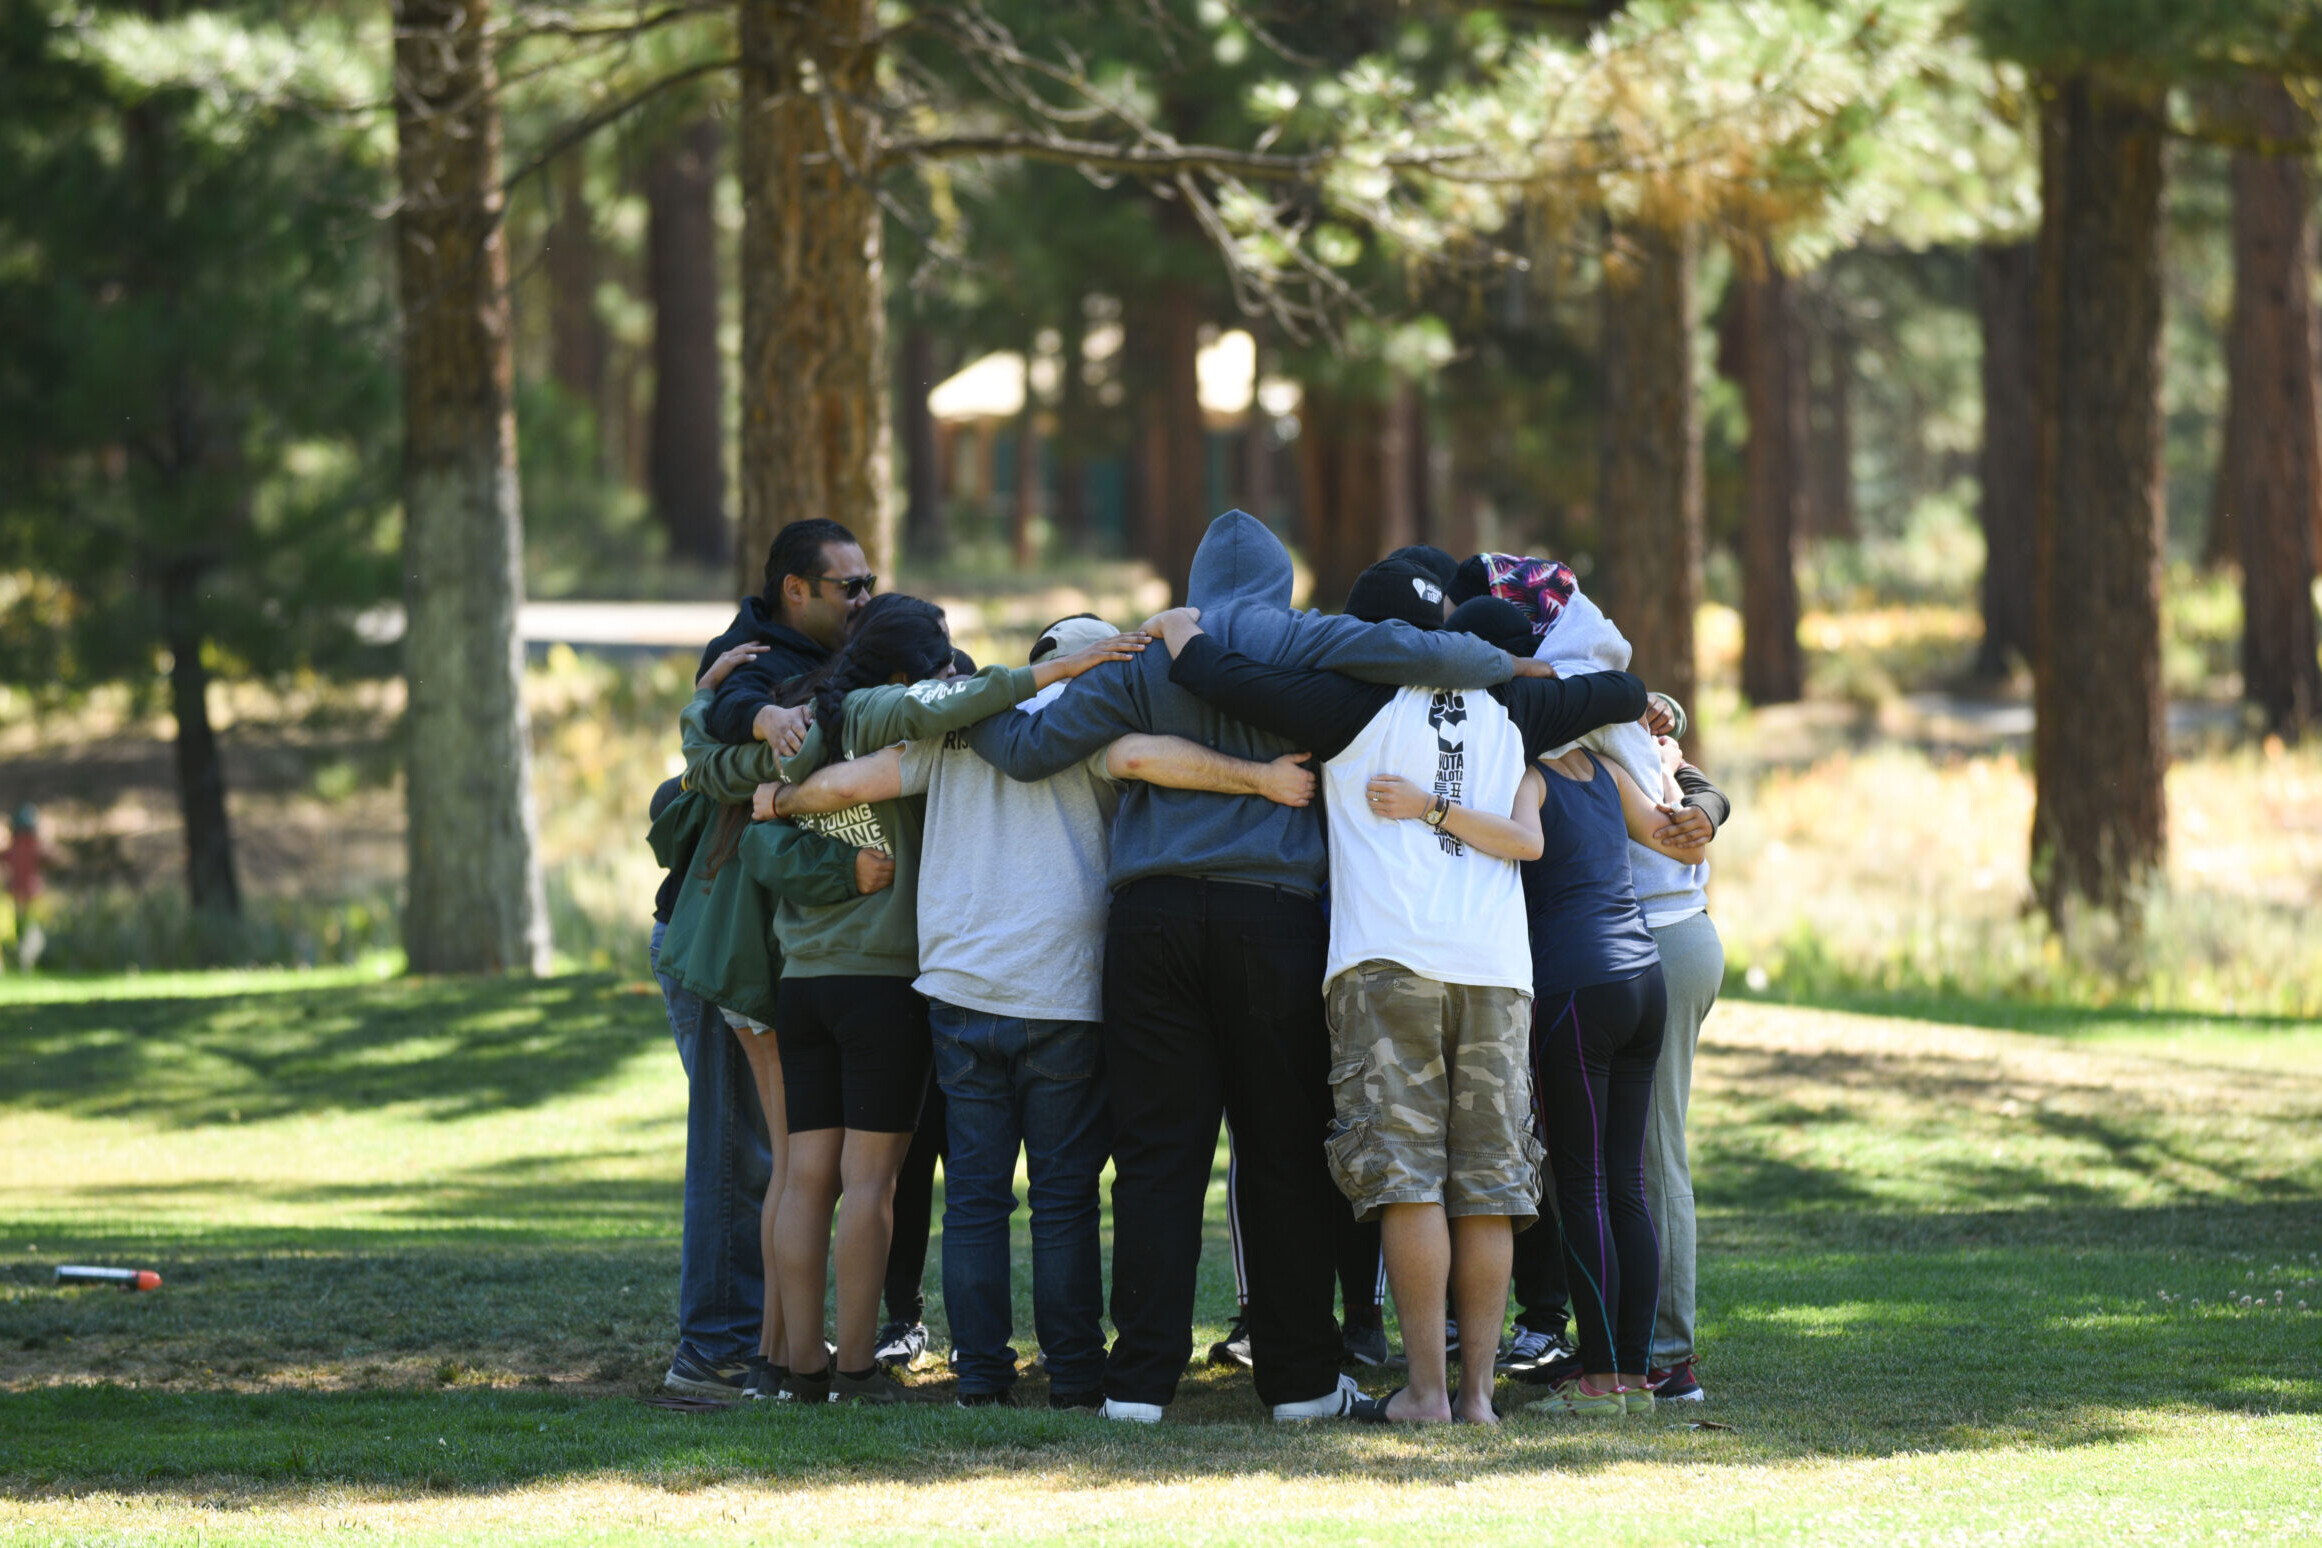 A group of kids in The President's Youth Council formed in a huddle with their arms wrapped around each other.